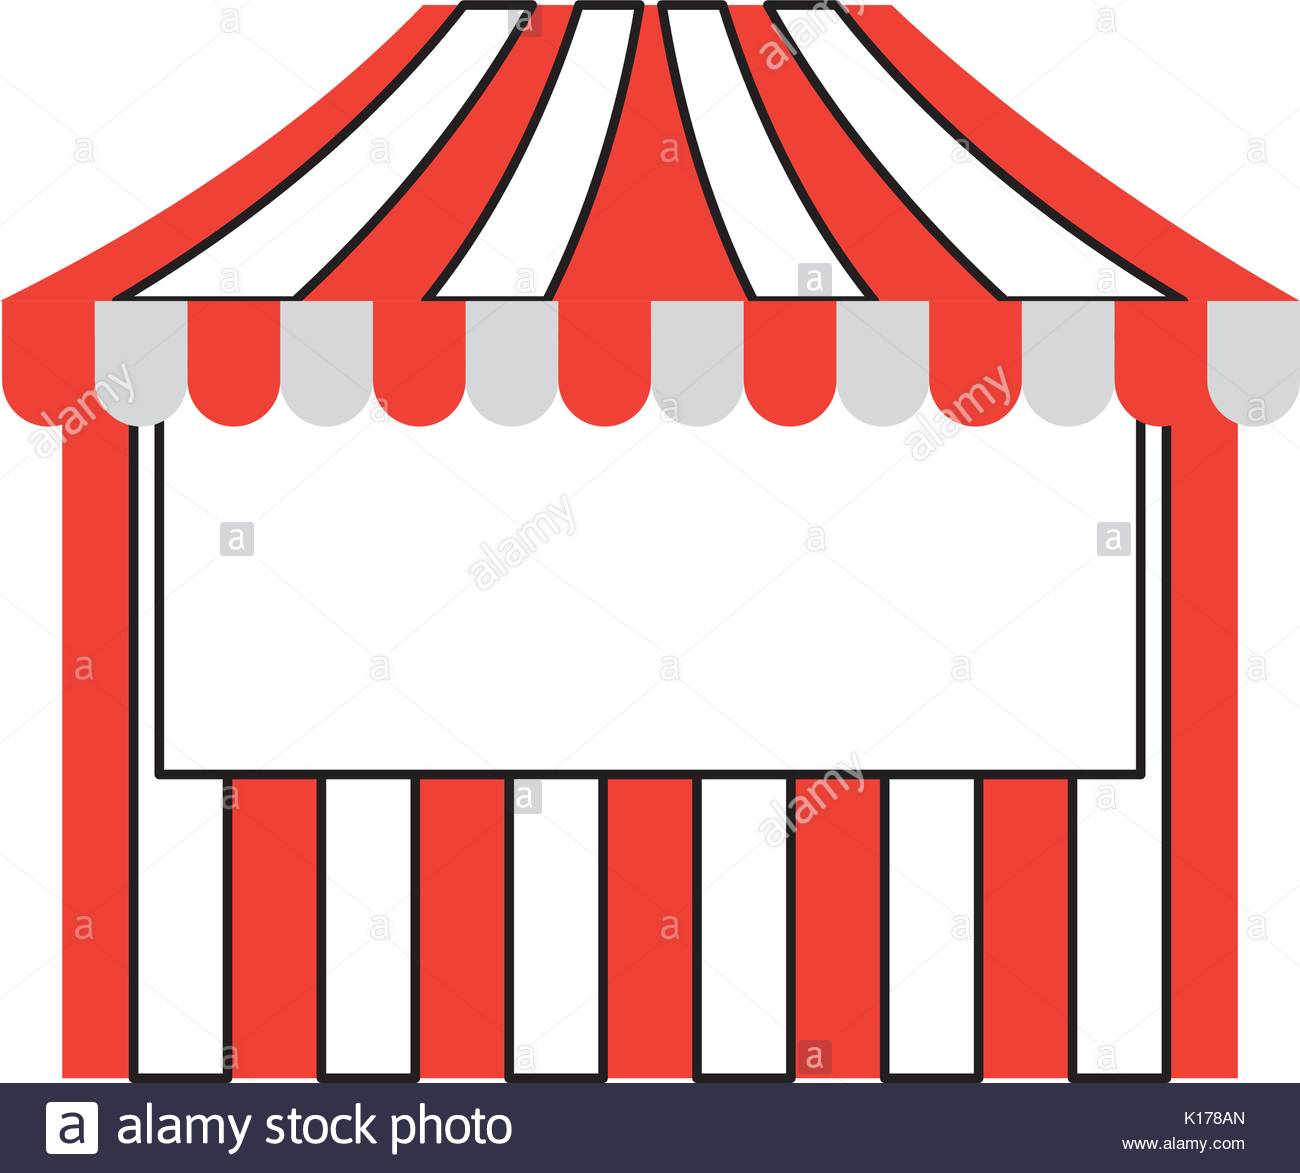 ticket clipart ticket booth